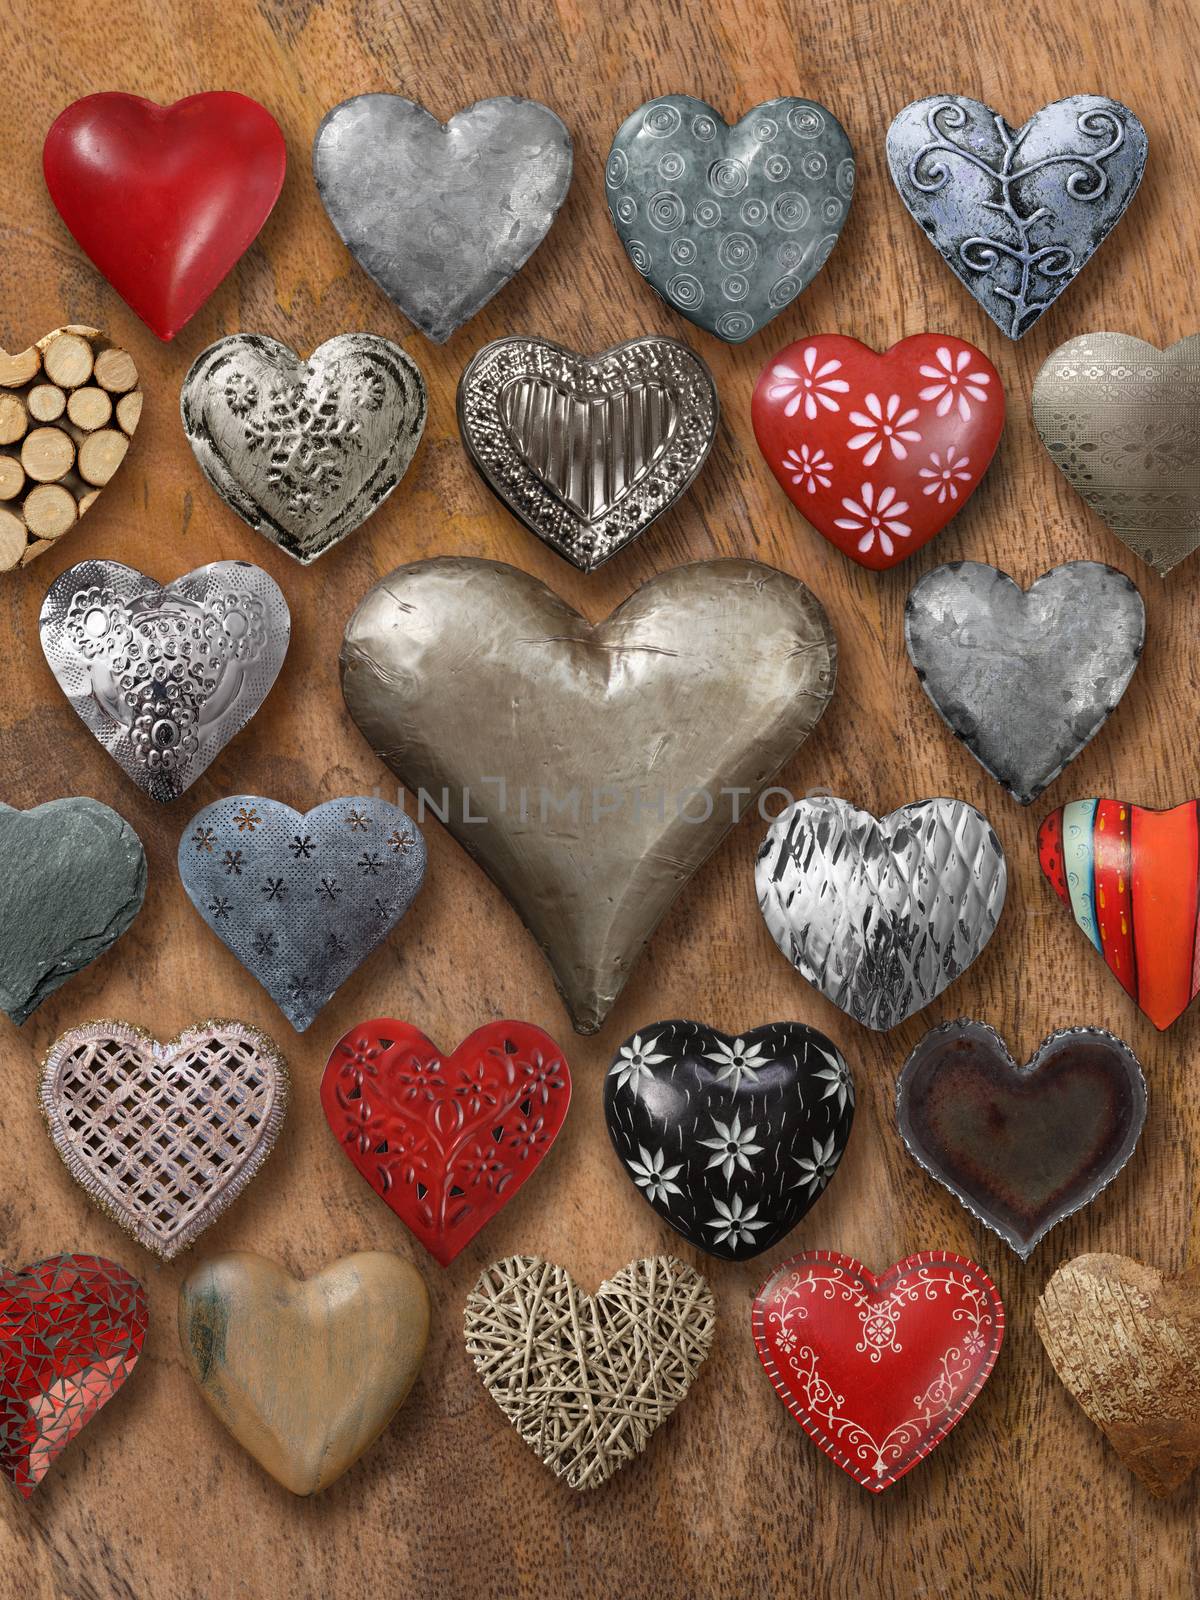 Photos of many heart-shaped things made of stone, metal and wood on wood background.